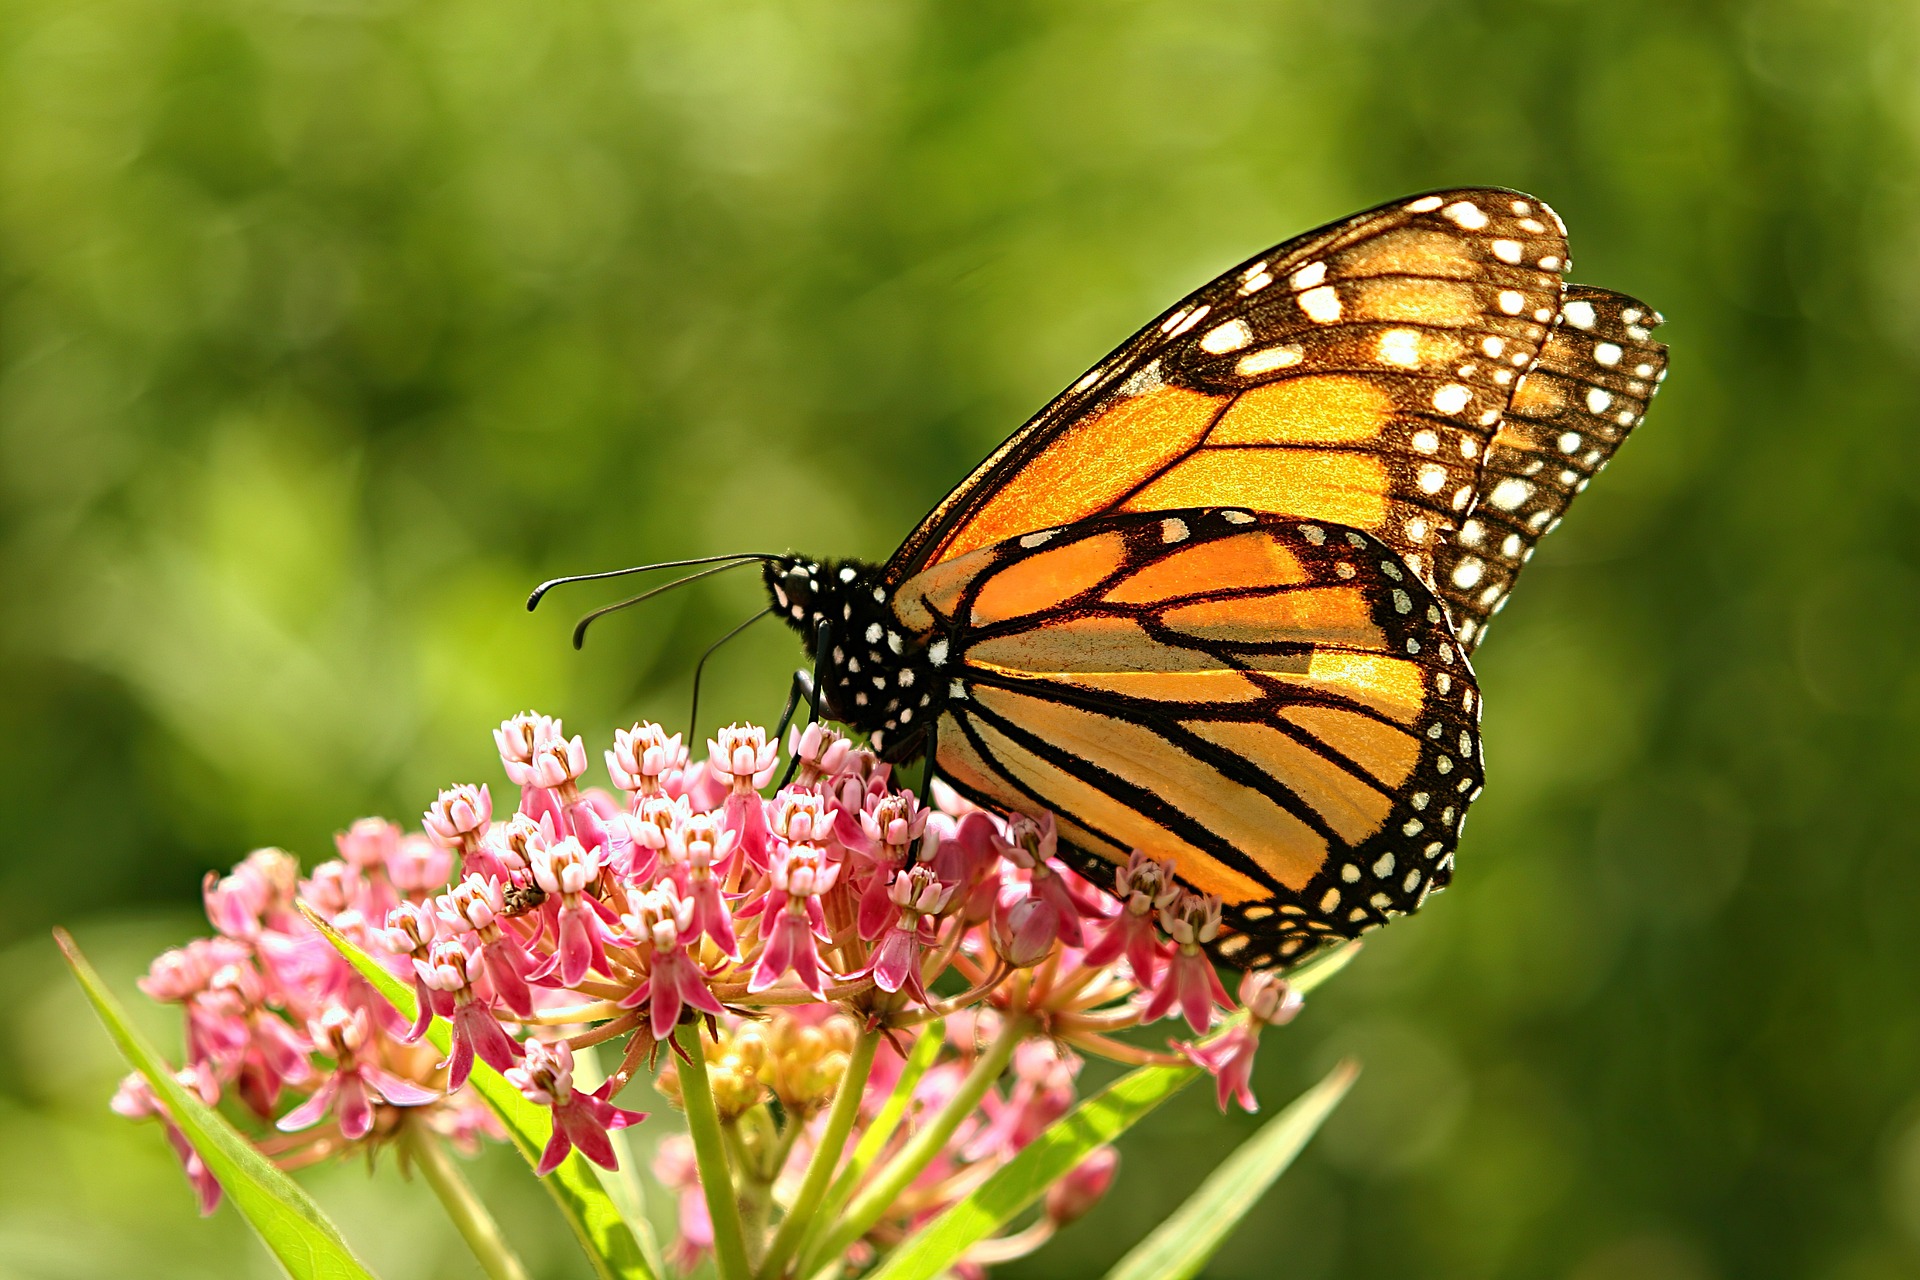 Topics will include how to grow vegetables and fruits, design gardens for butterflies, improve your soil, add small trees to your landscape, grow plants in containers and more. (Pixabay photo)